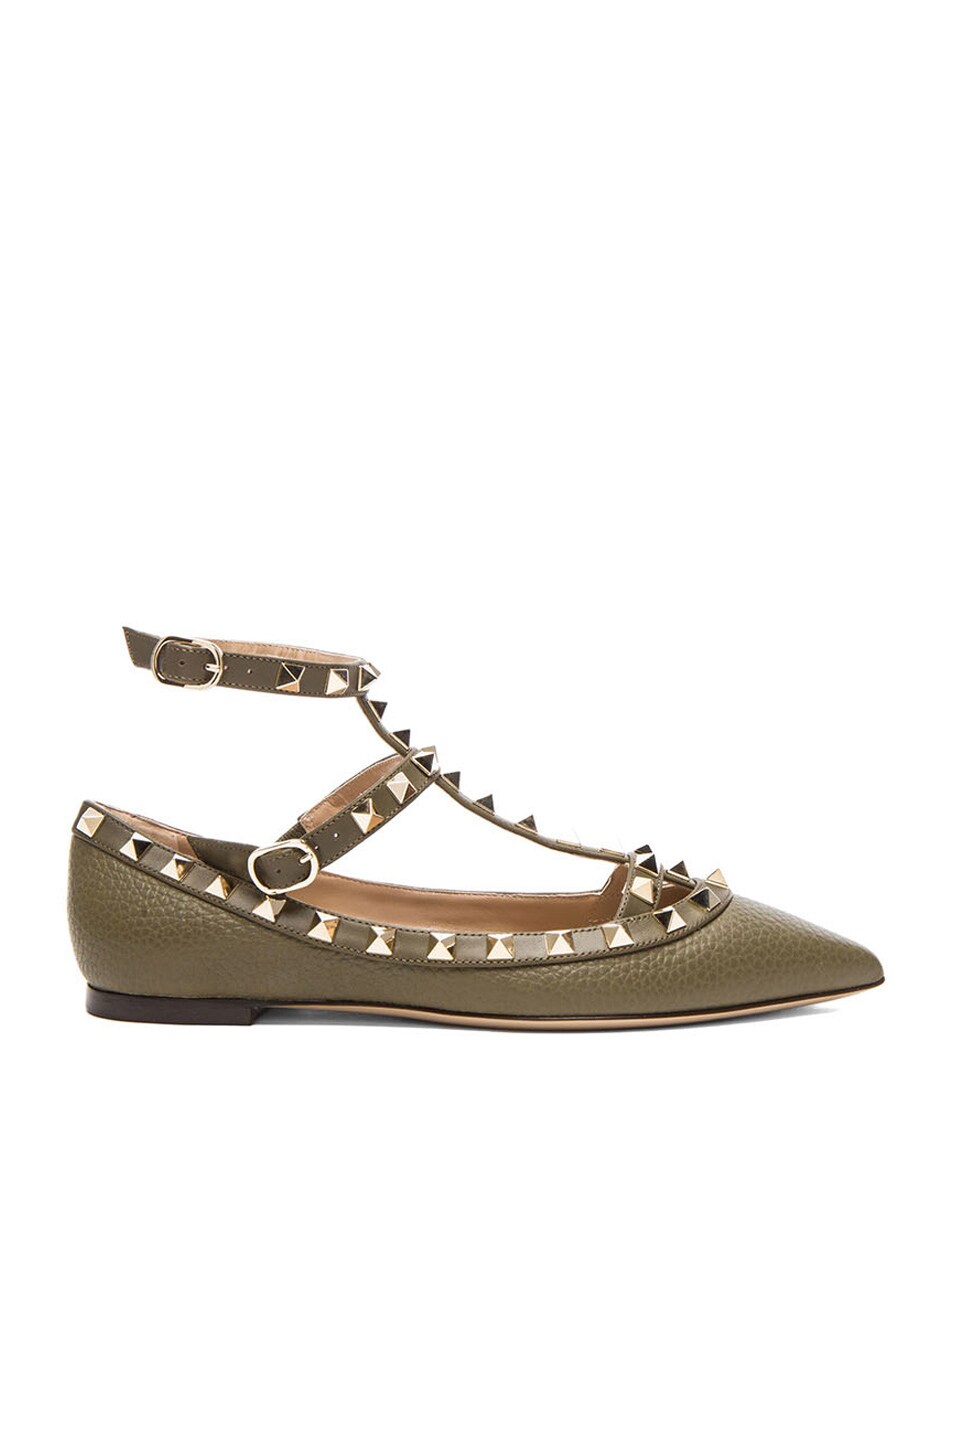 Image 1 of Valentino Garavani Stamped Rockstud Leather Cage Flats in Army Green